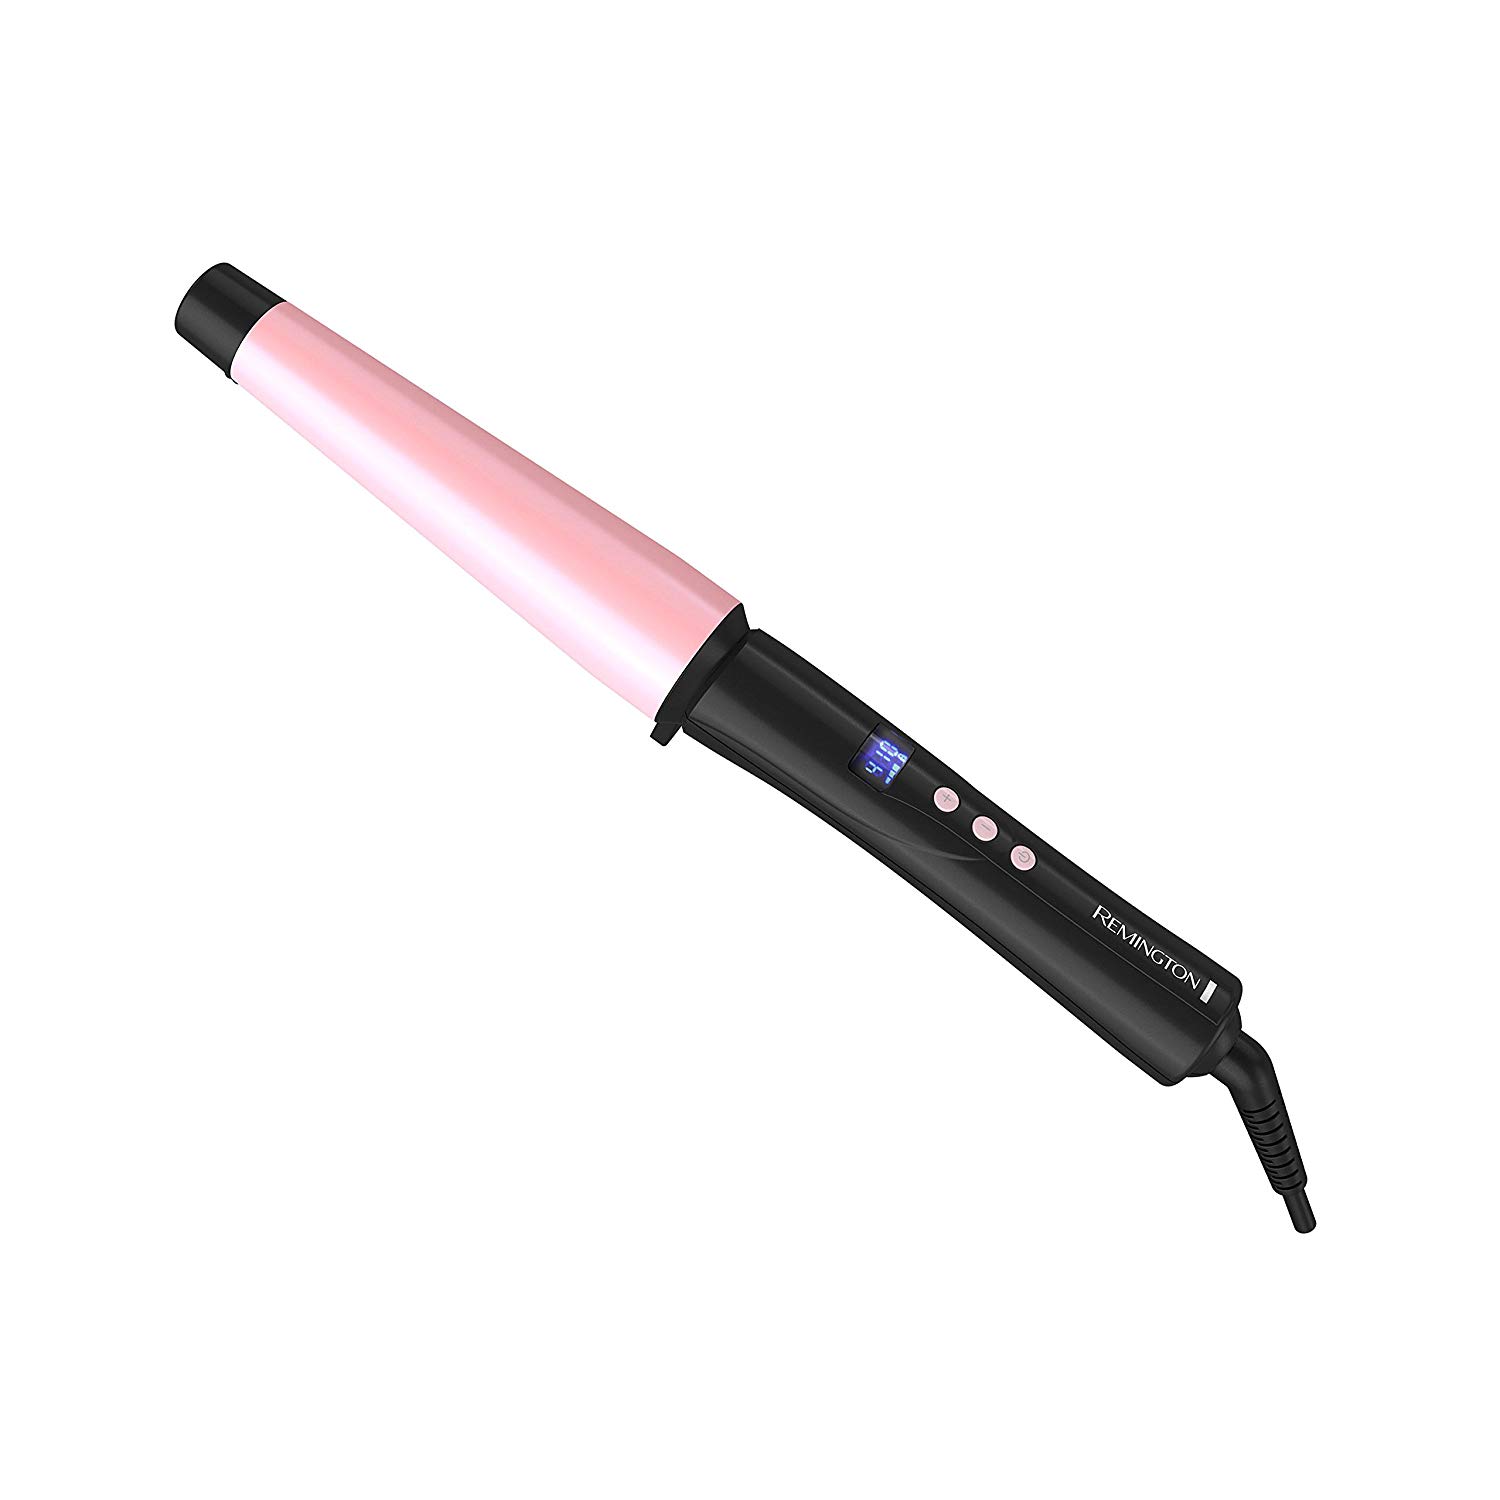 Remington Pro 1-1½” Curling Wand with Pearl Ceramic Technology and Digital Controls, CI9538